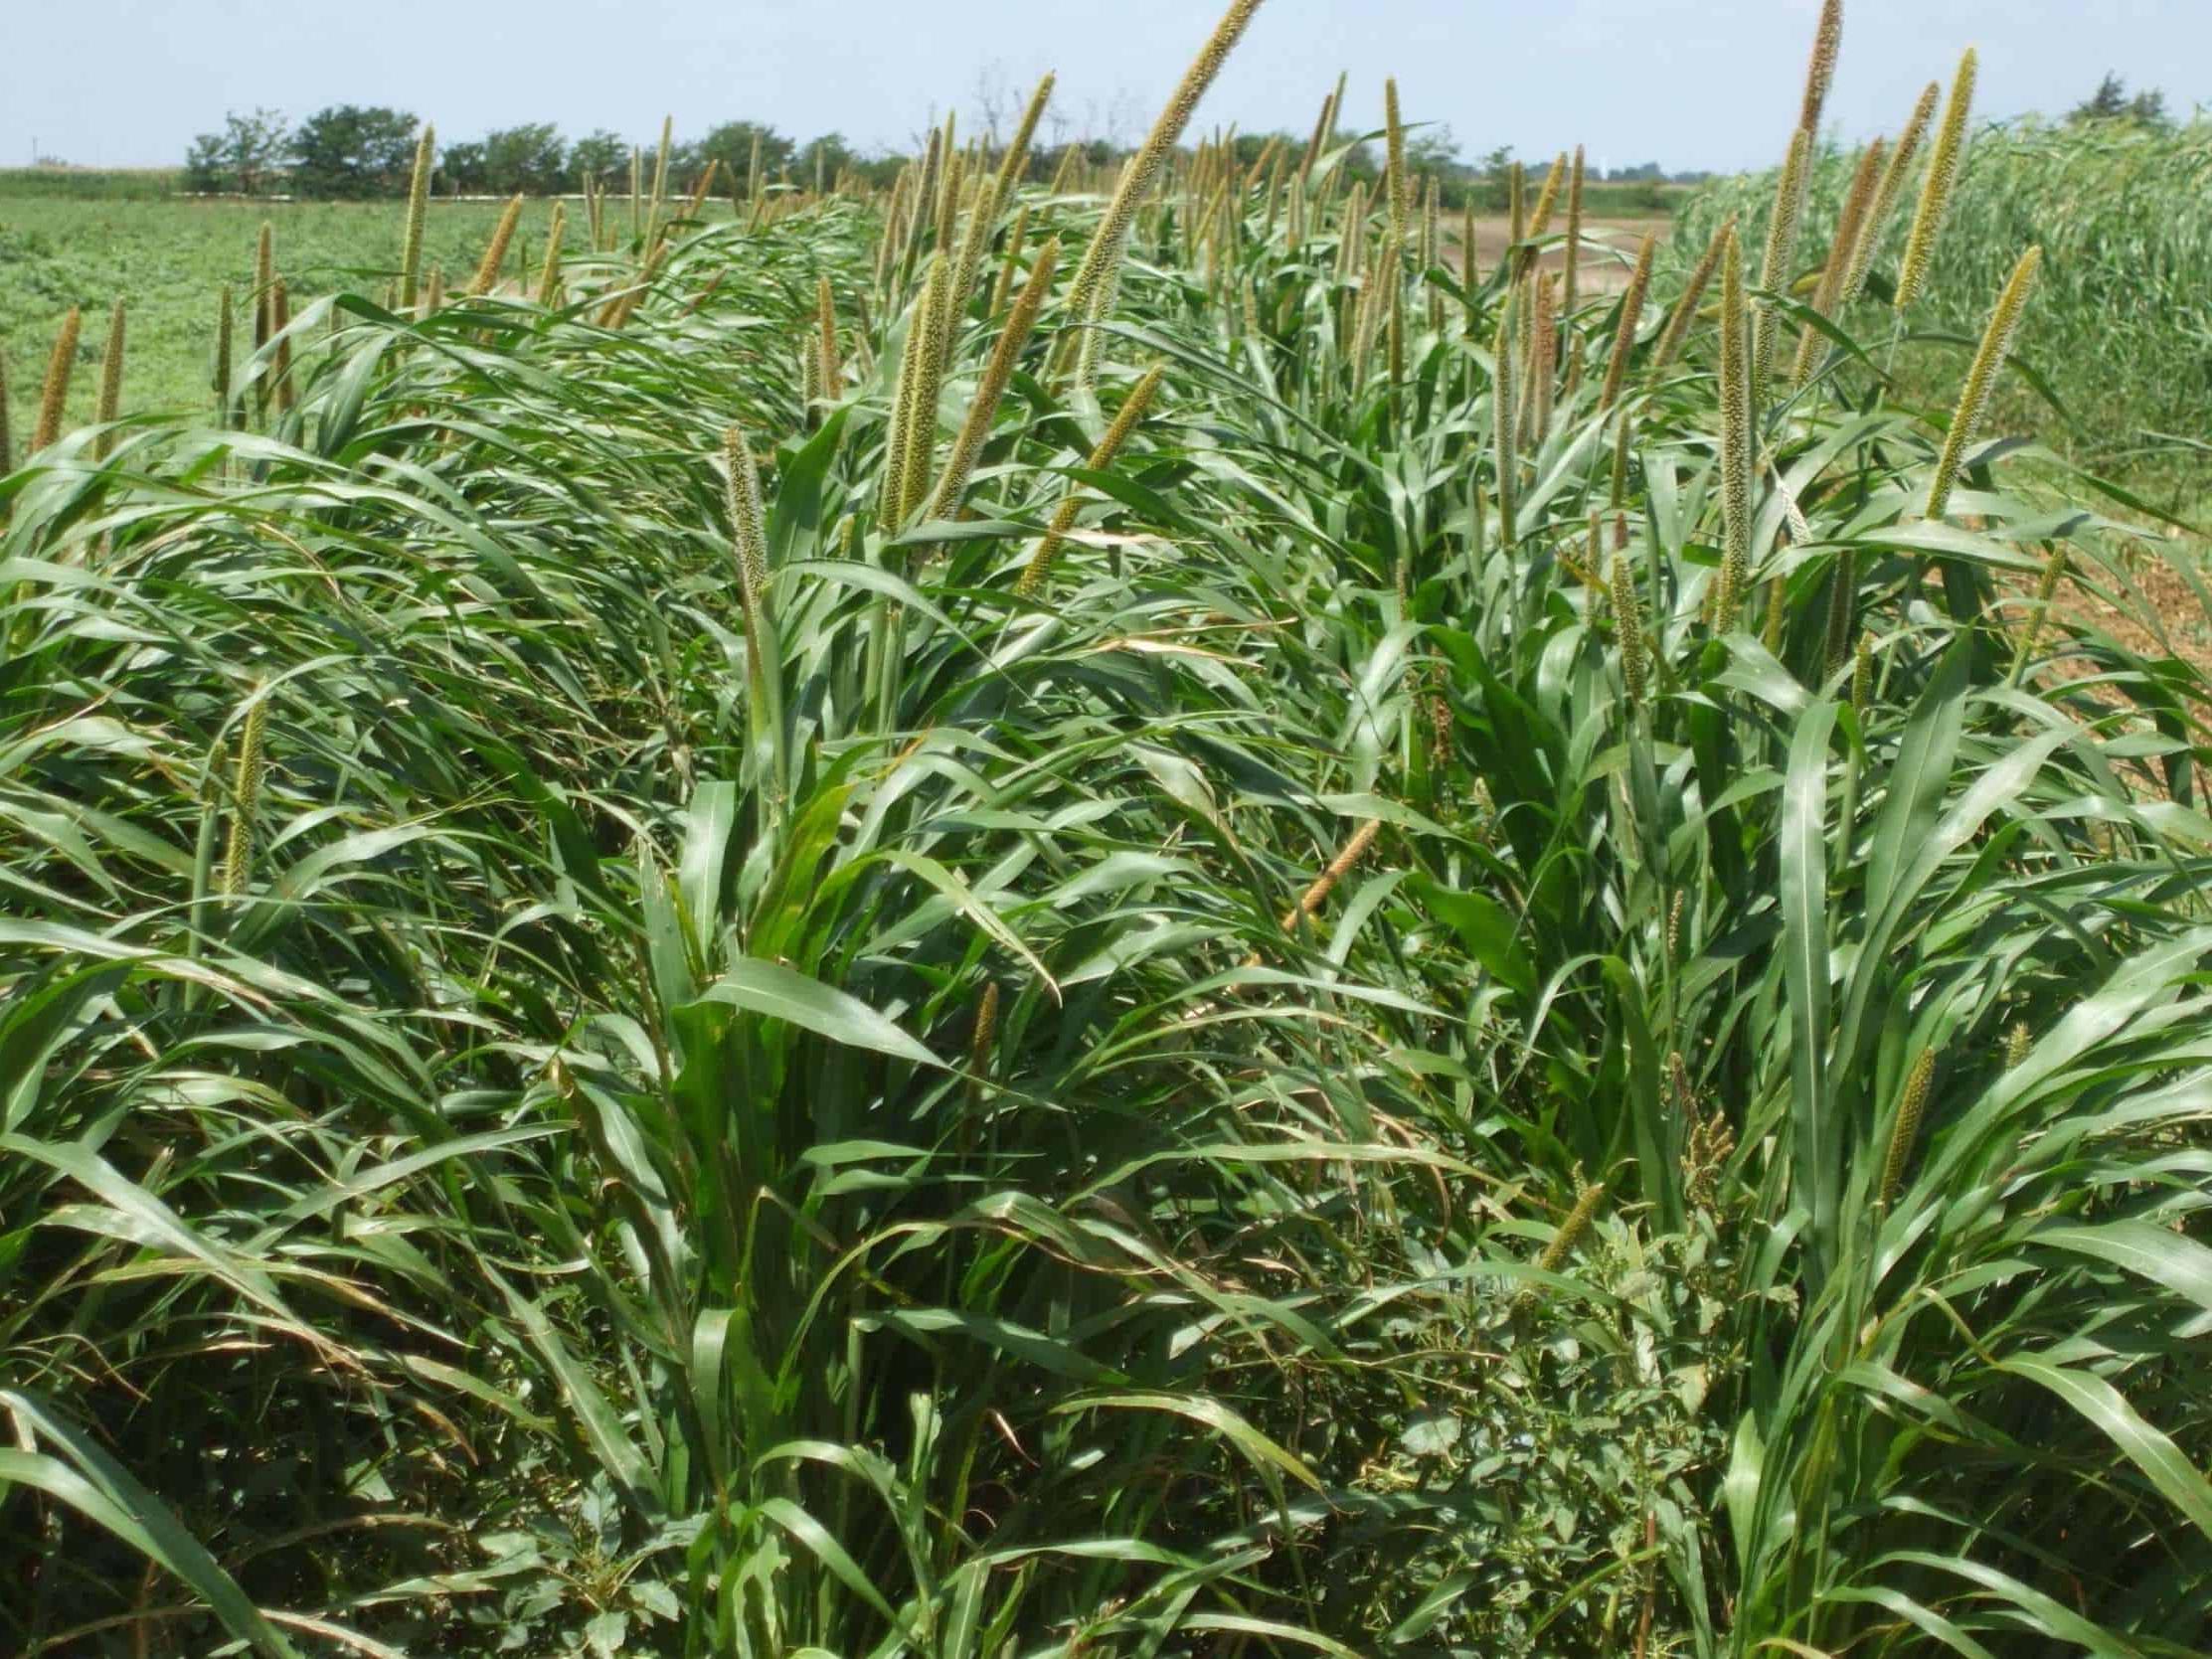 Hybrid Pearl Millet blowing in the wind